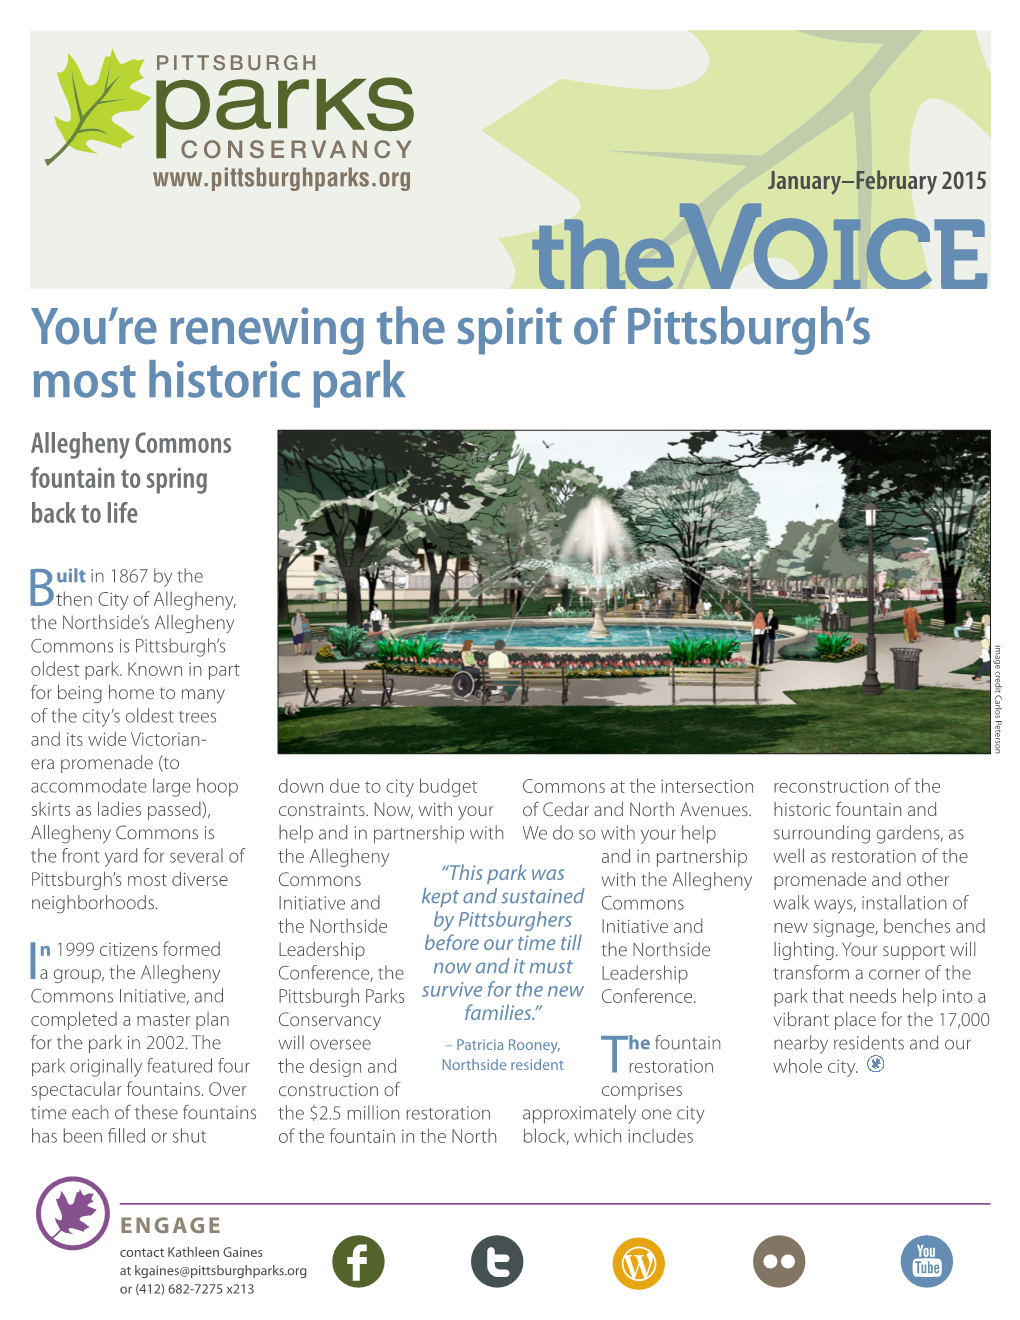 You're Renewing the Spirit of Pittsburgh's Most Historic Park